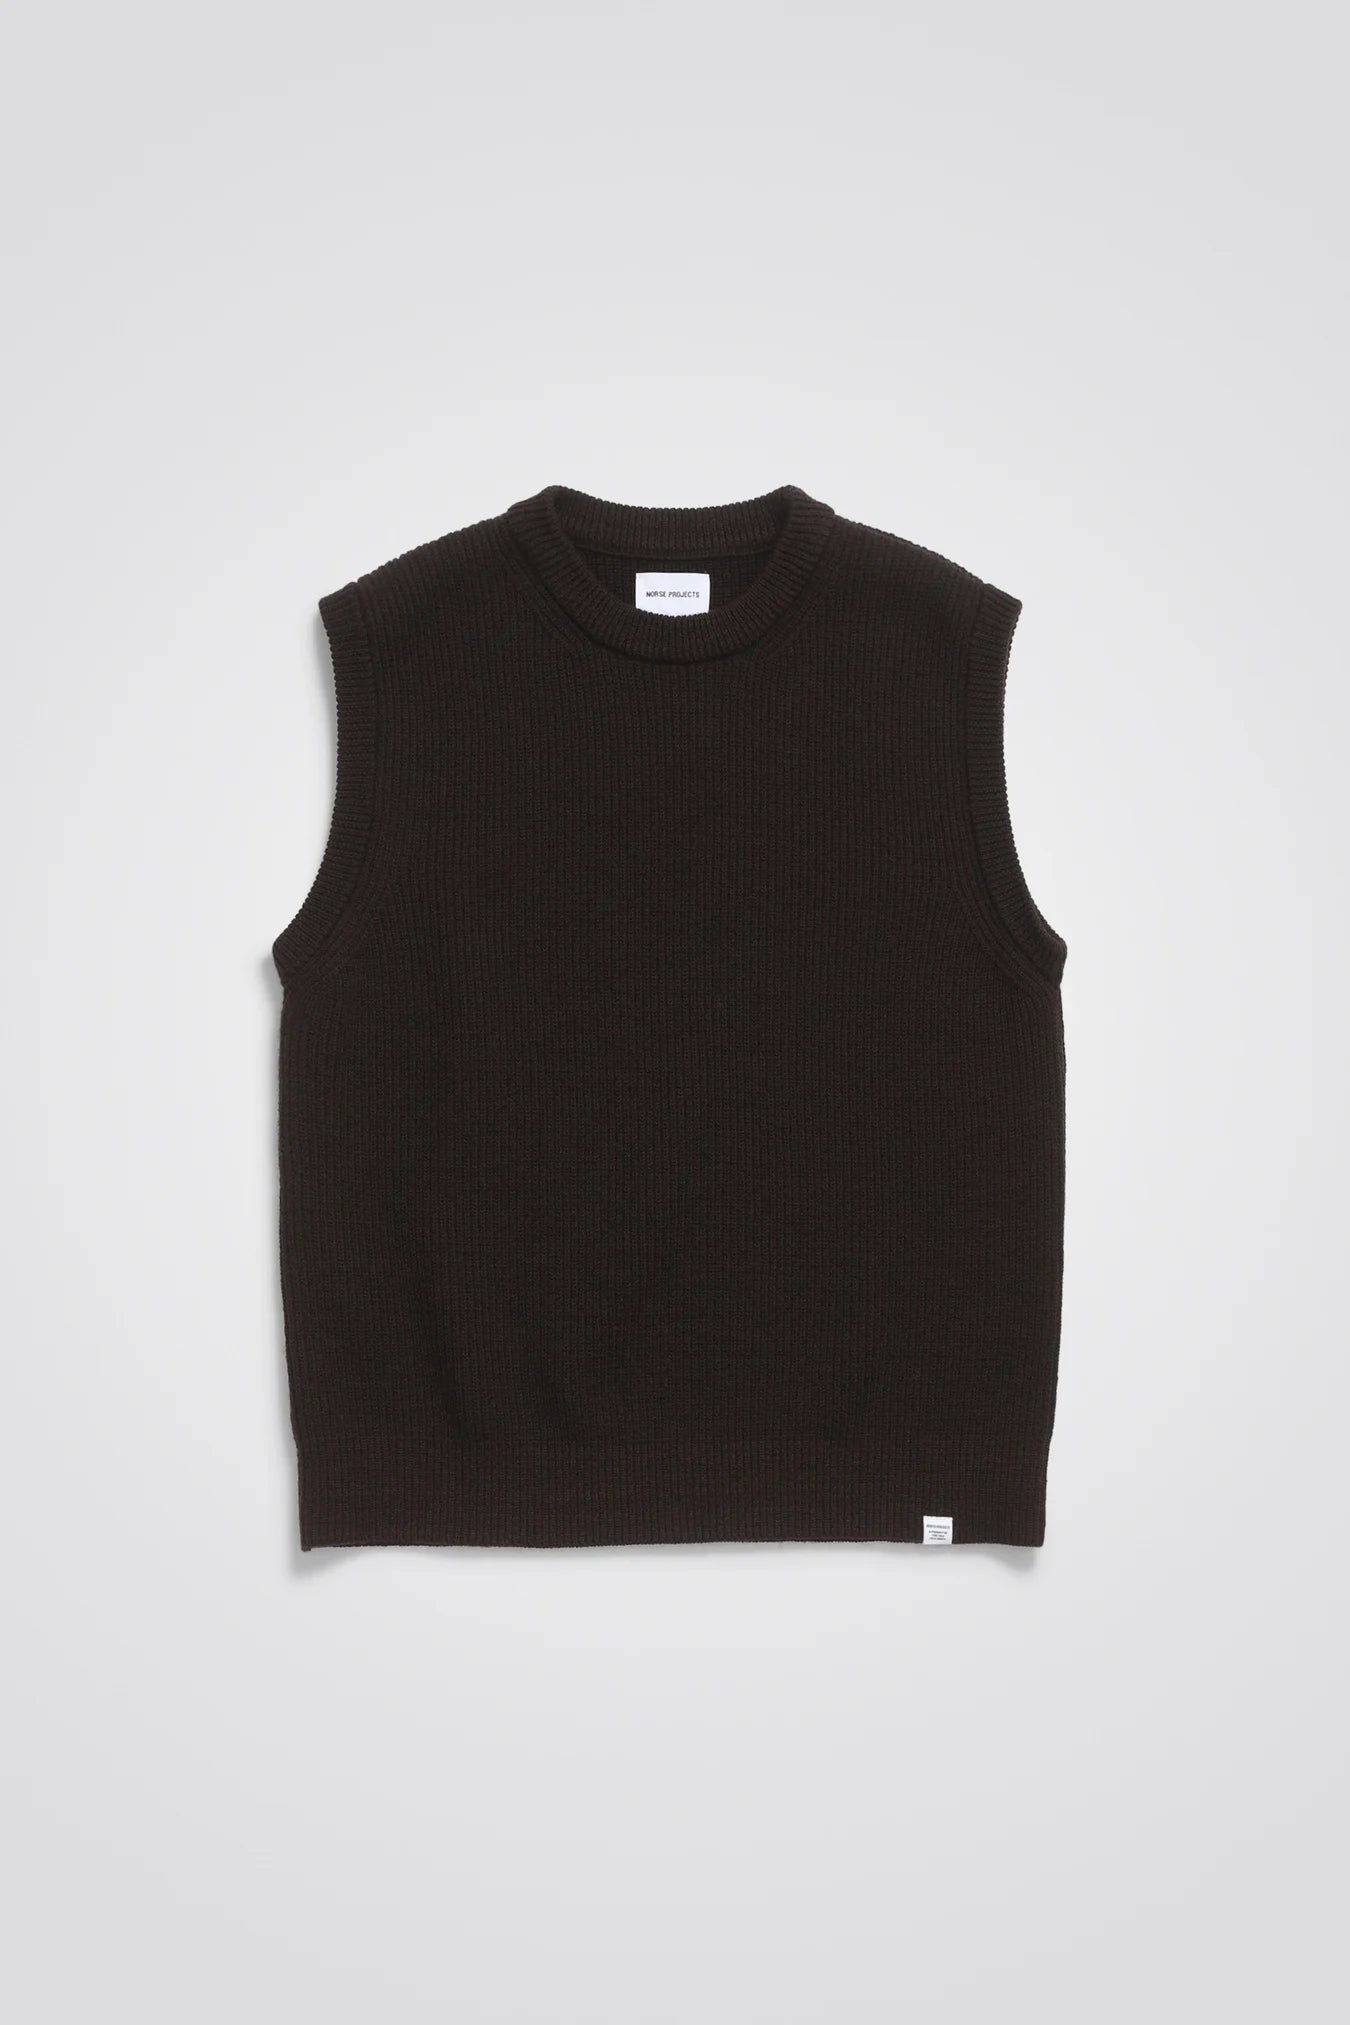 Norse Manfred Wool Rib Vest Espresso - KYOTO - Norse Projects